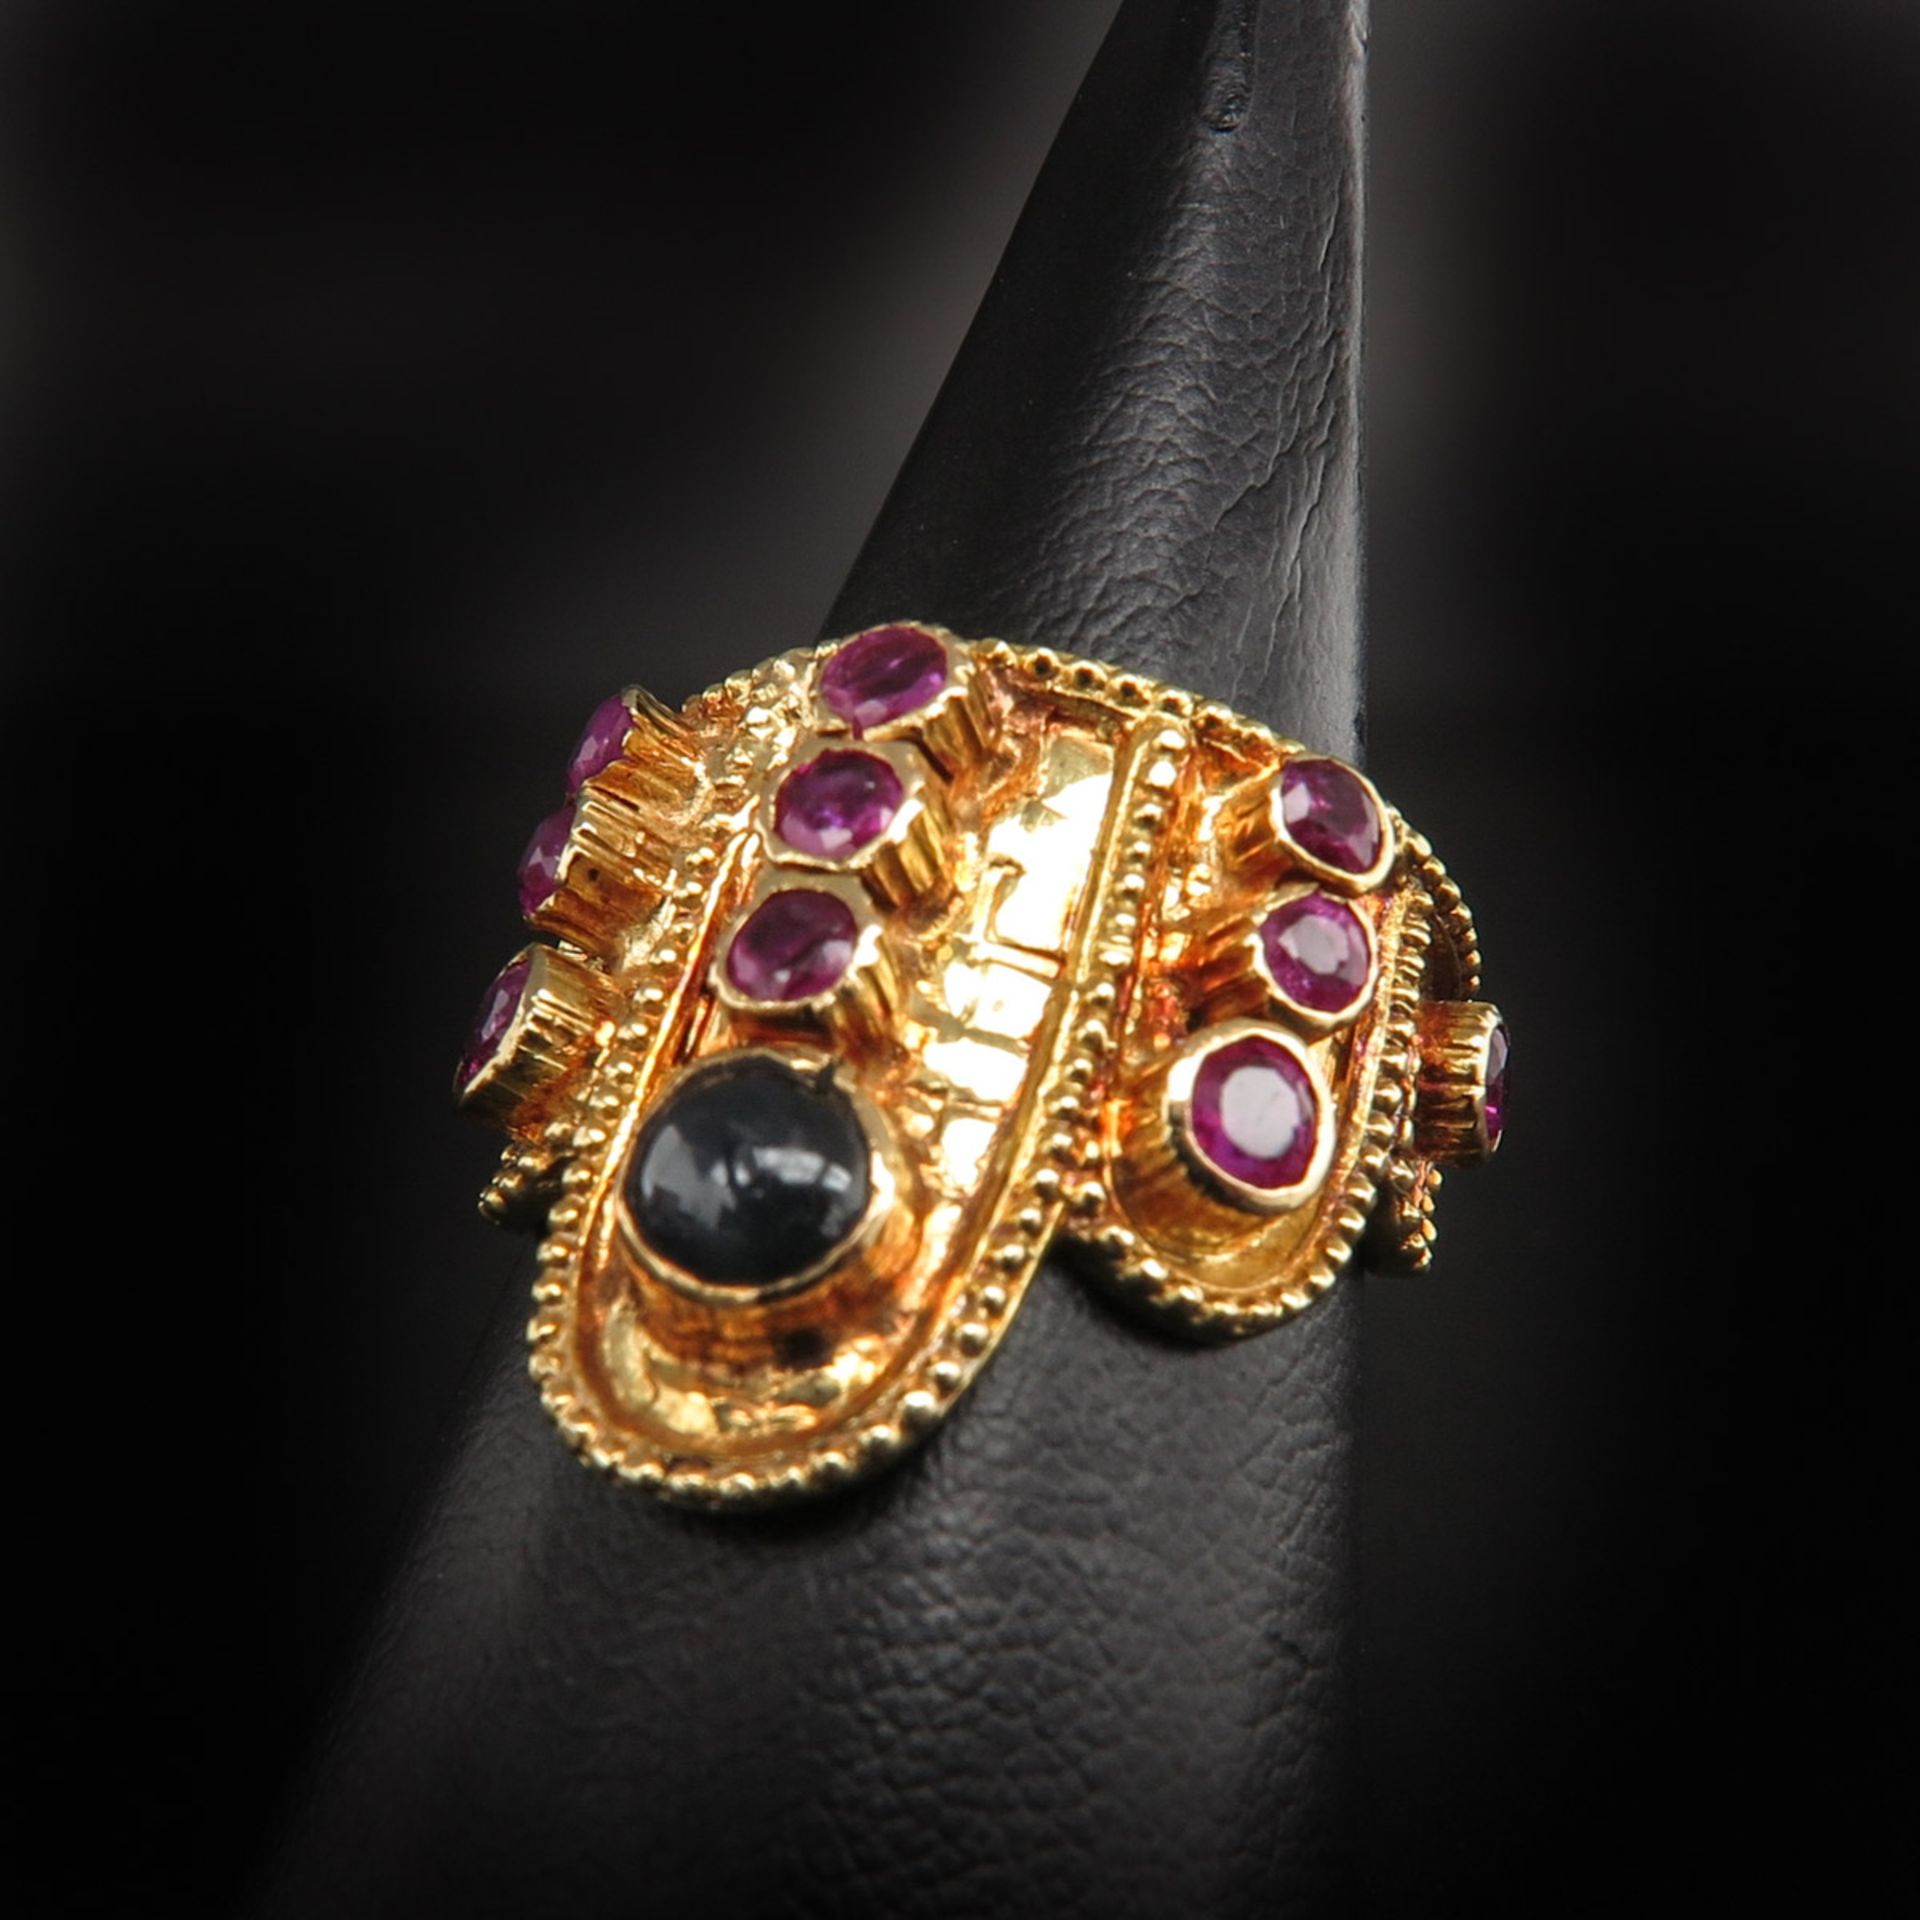 A Ladies 18KG Ruby and Saphire Ring - Image 2 of 2